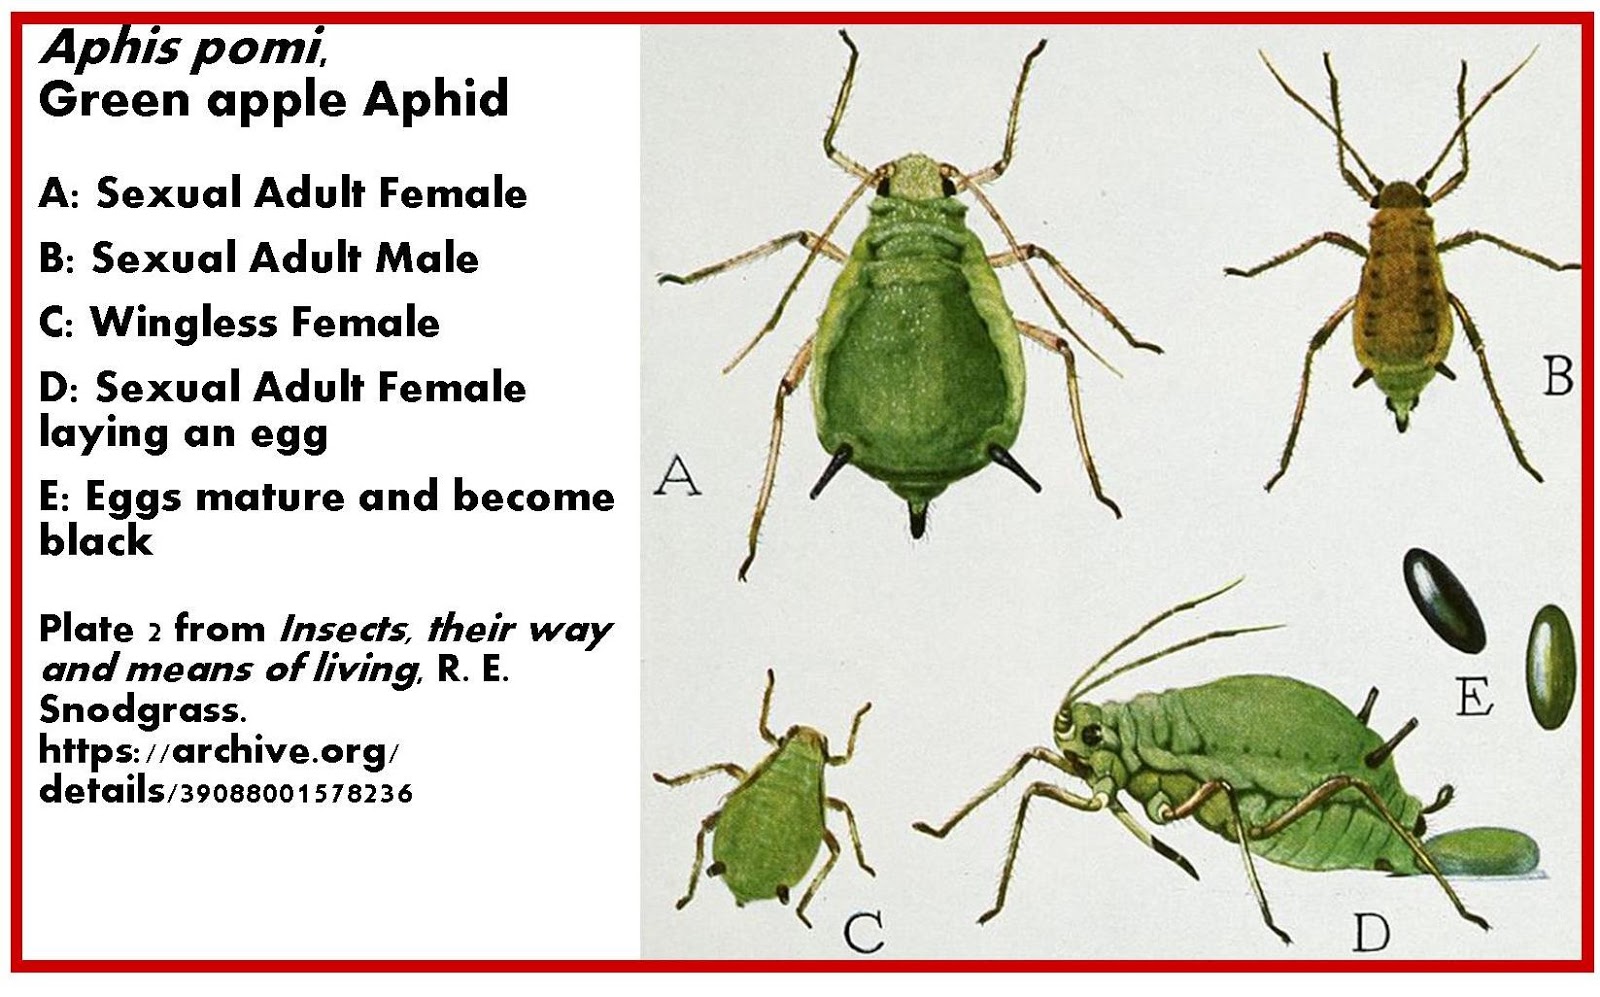 Aphid life cycle Aphid pomi Pengo Wikimedia Commons.jpg